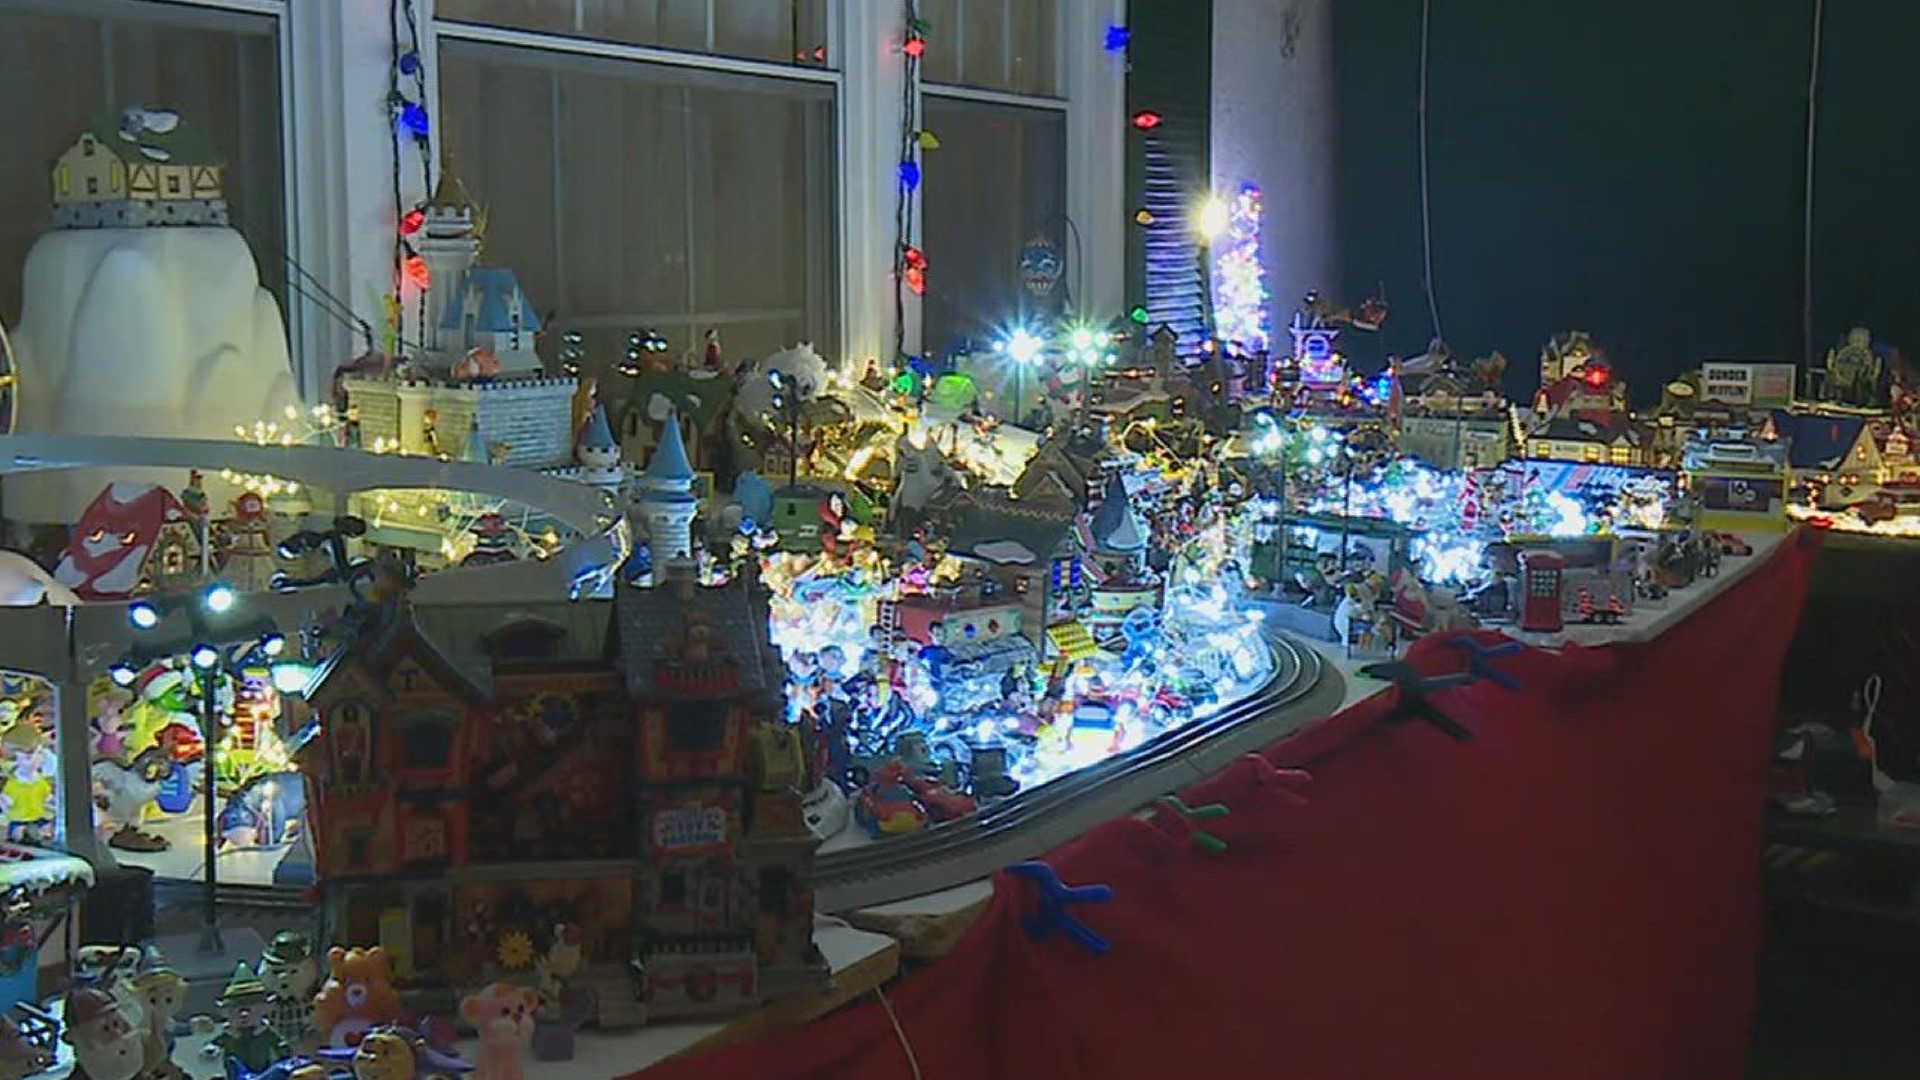 It's our area, only smaller. That's the idea behind a unique holiday display. Newswatch 16's Jack Culkin gives us a look.